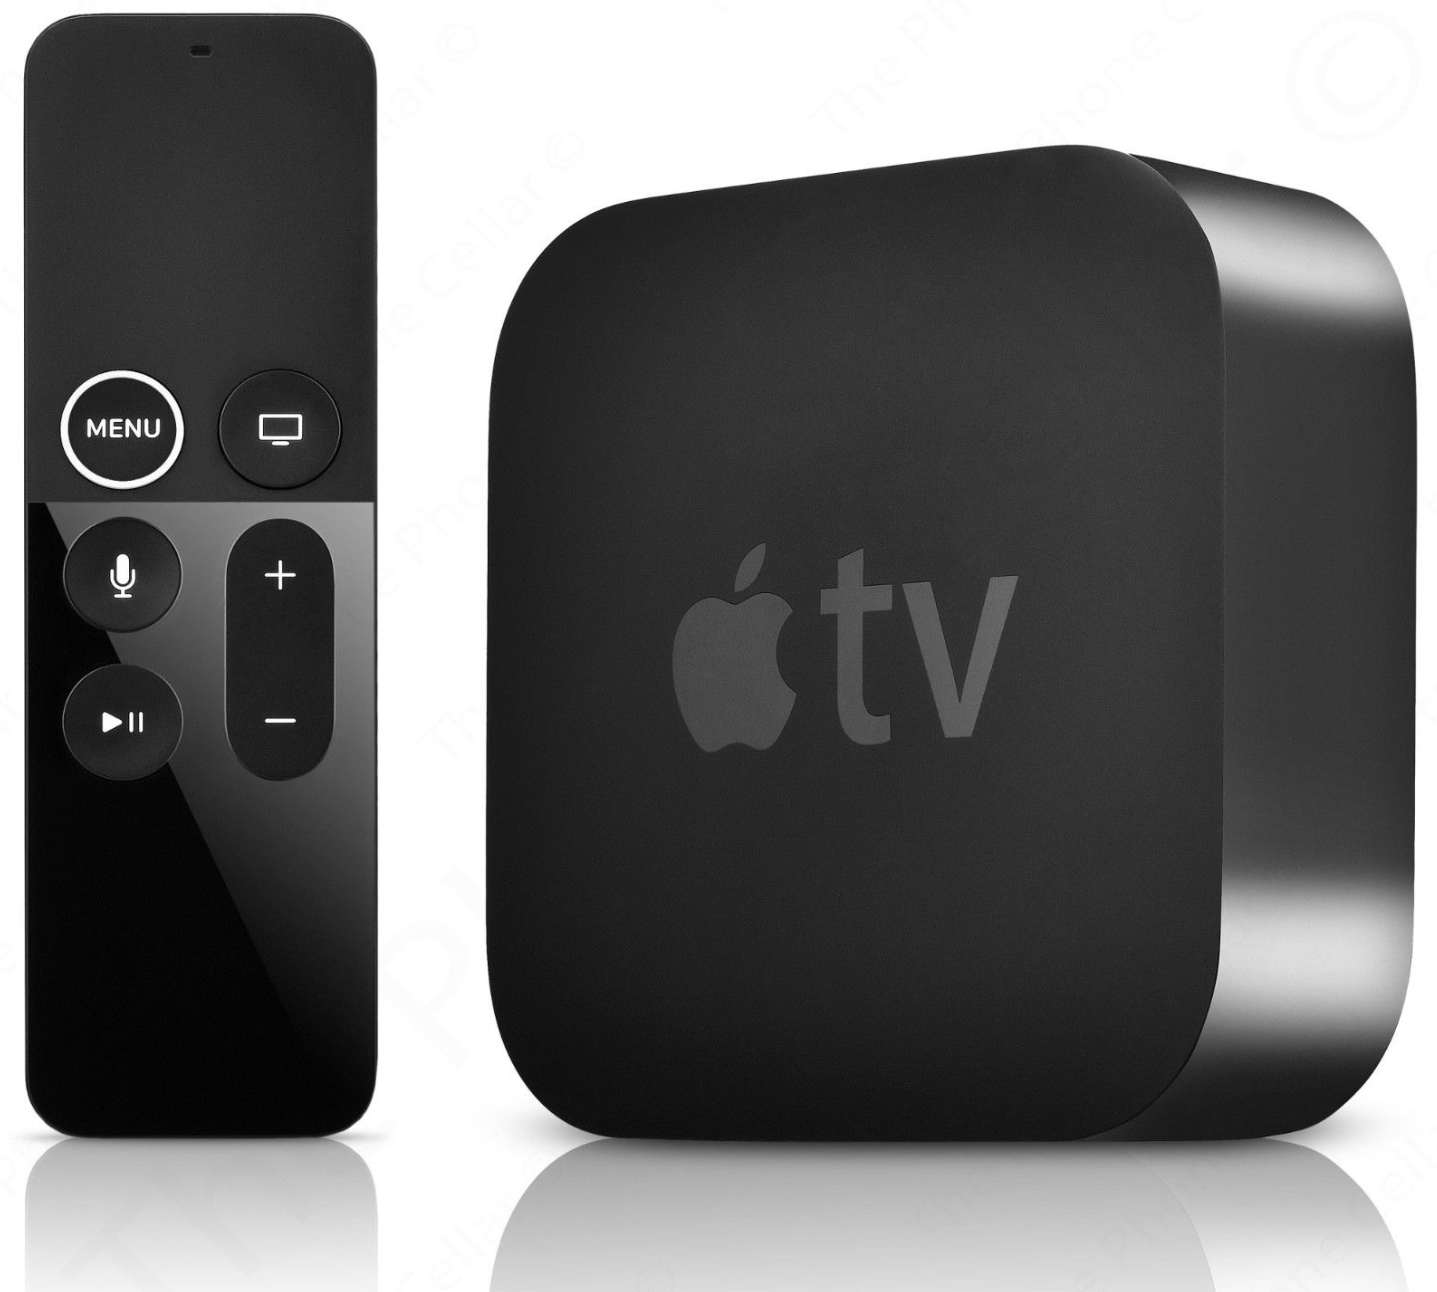 How to Activate Starz on Apple TV?